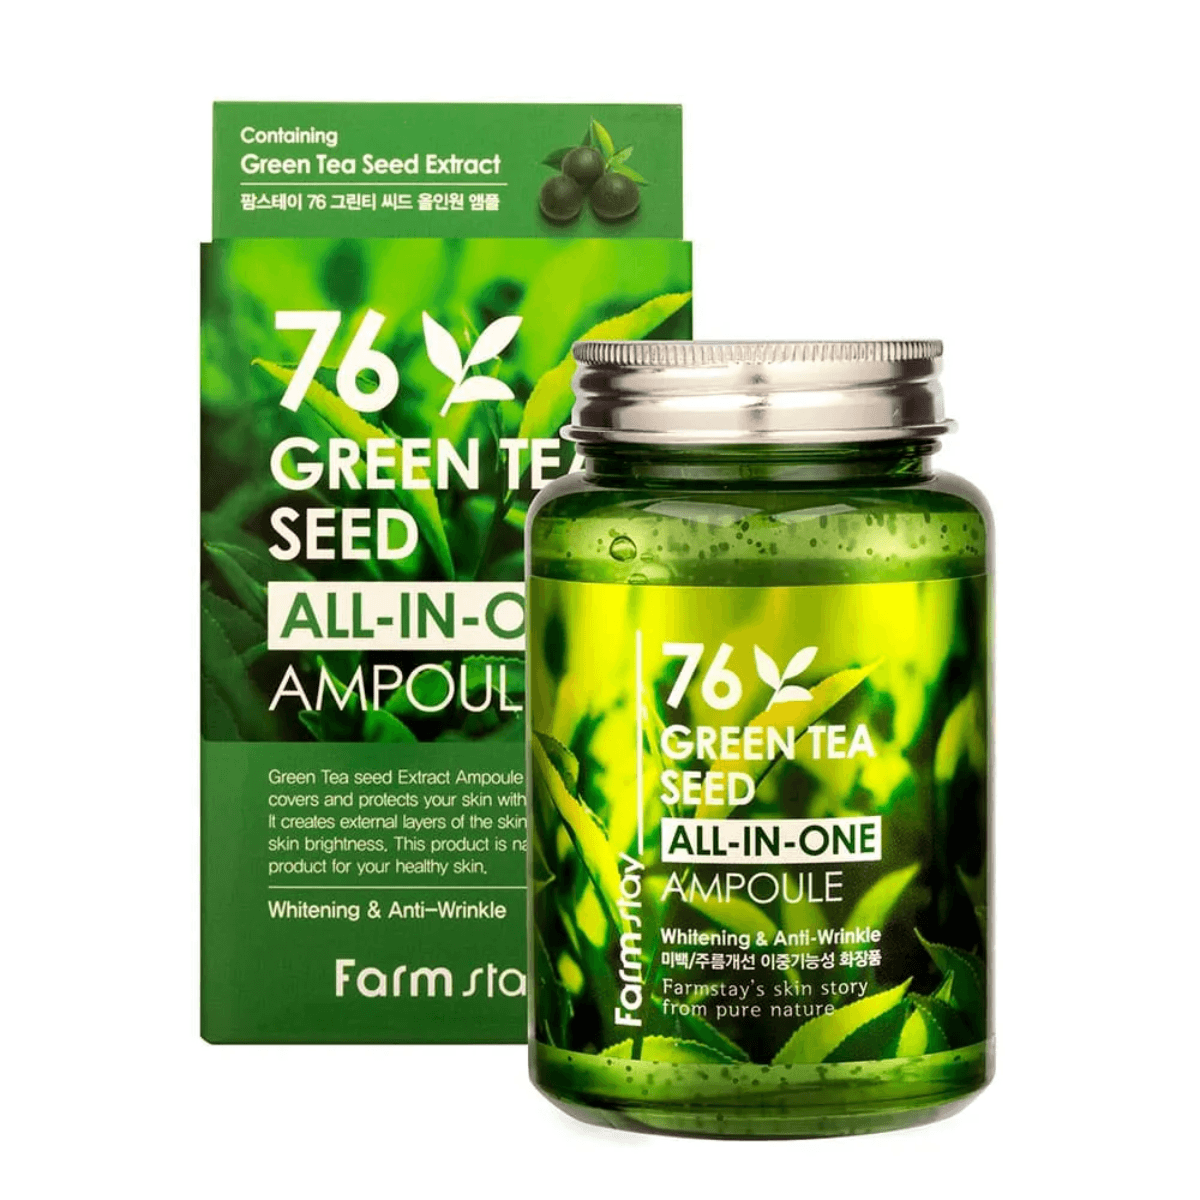 Farmstay 76 Green Tea Seed All-in-One Ampoule: Hydrates, protects, and brightens skin. Provides antioxidant benefits.